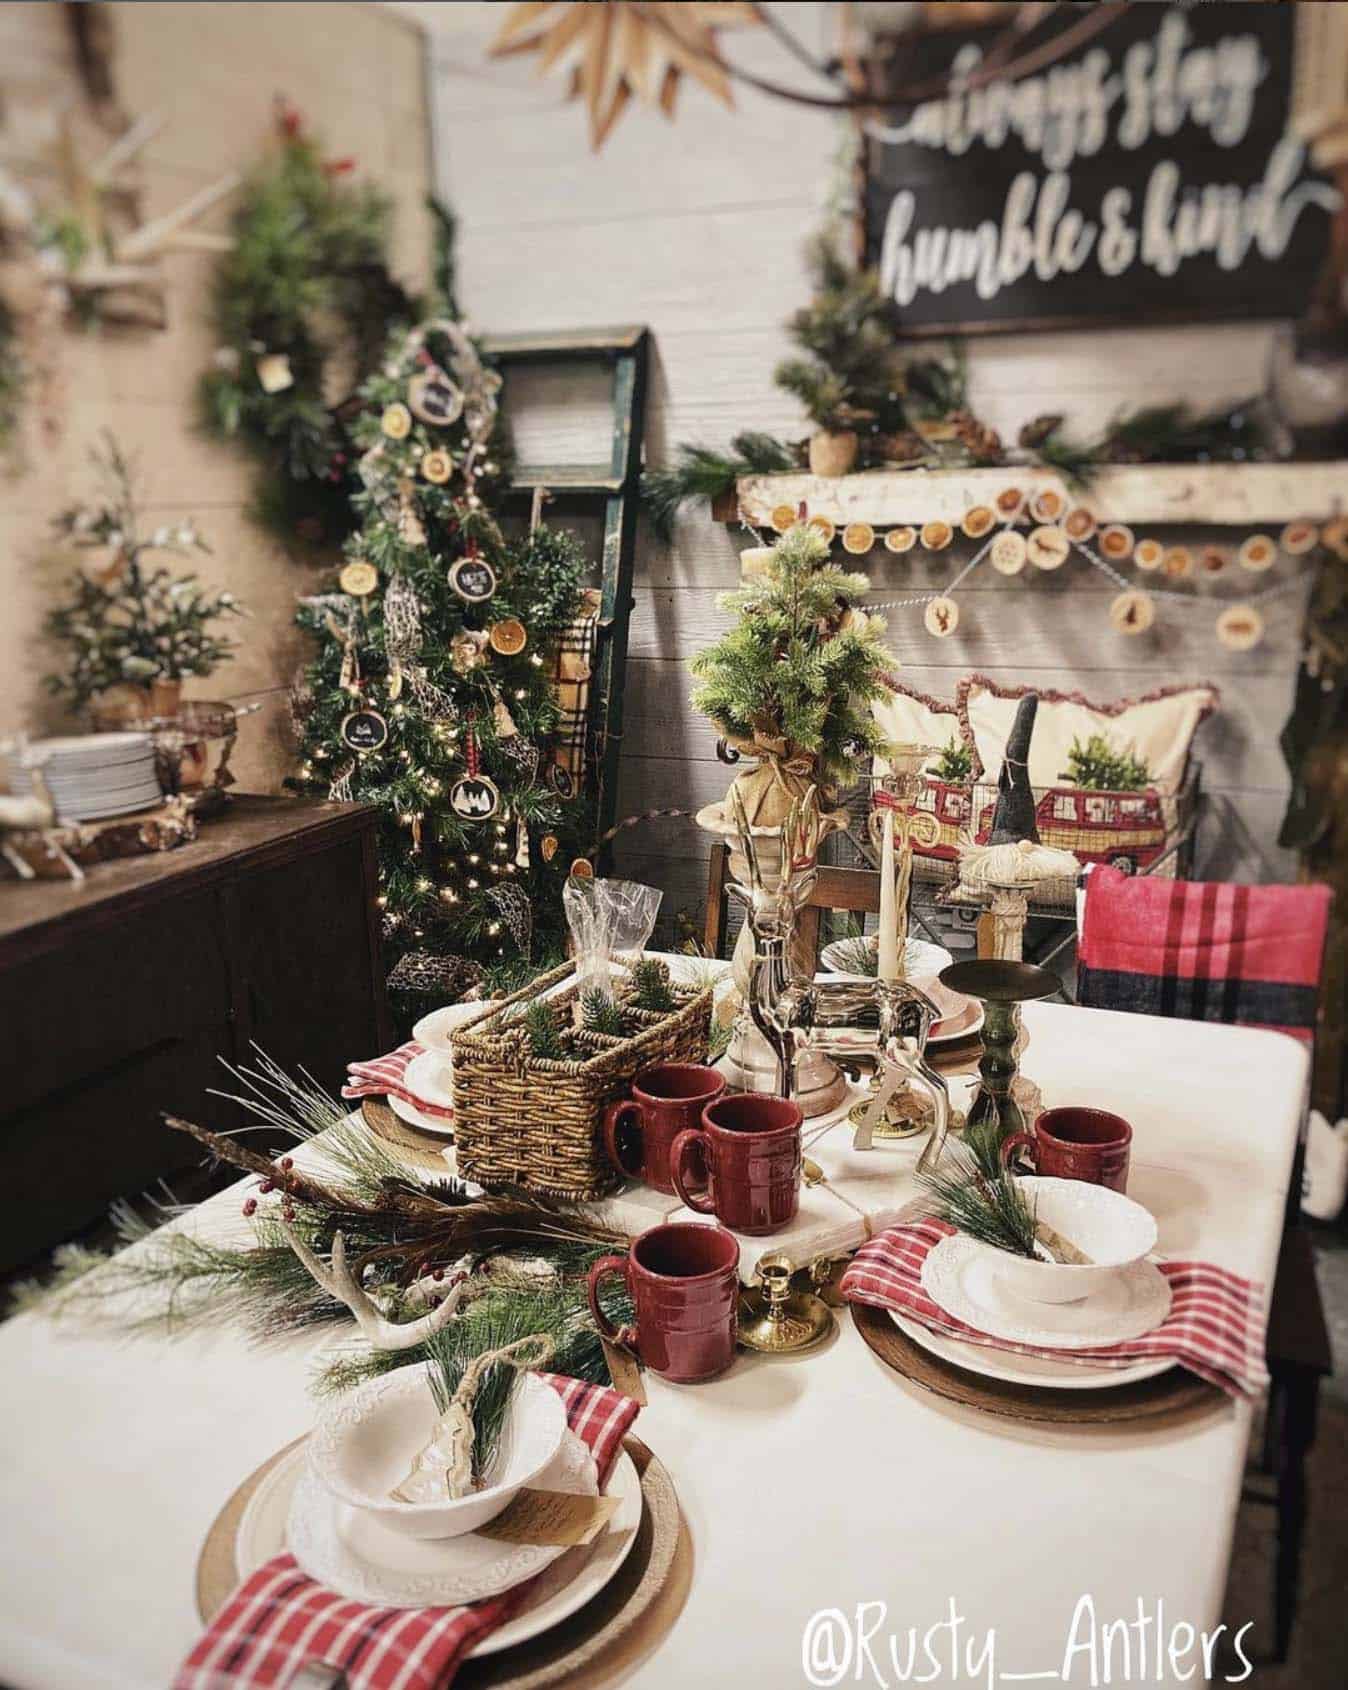 Christmas dining table with a mix of rustic and vintage decorations